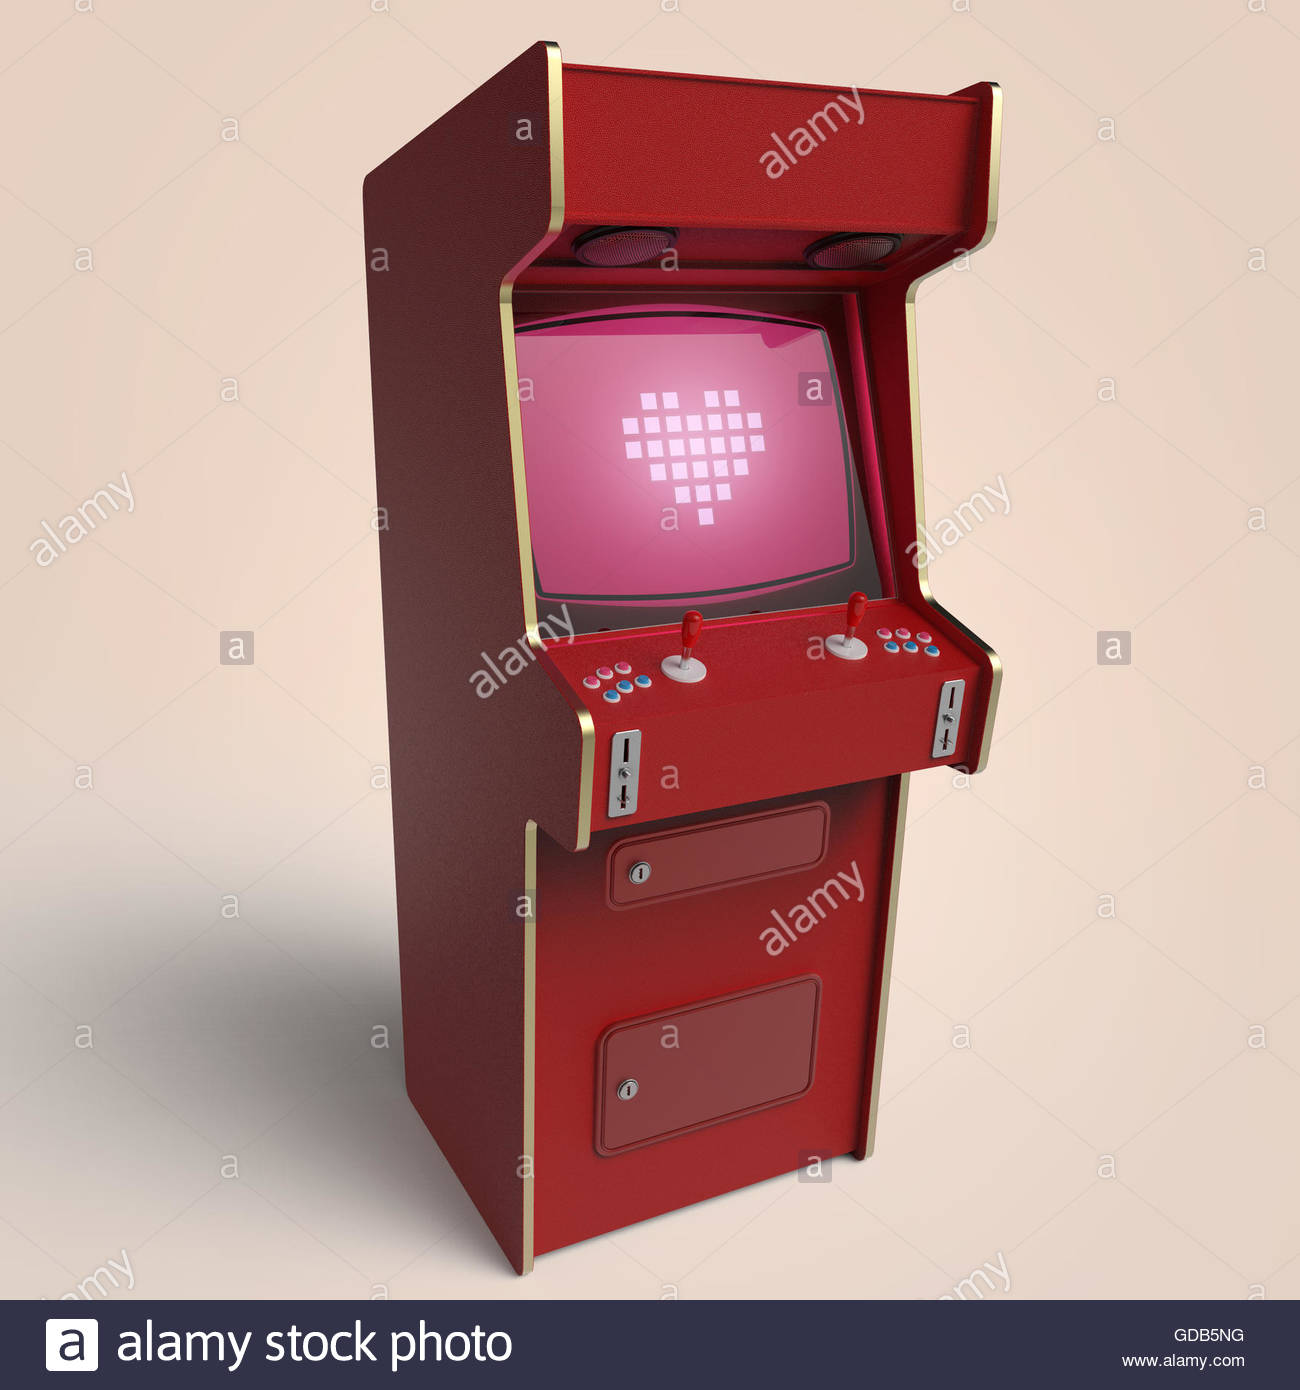 File:Arcade machine icon.png - Wikimedia Commons